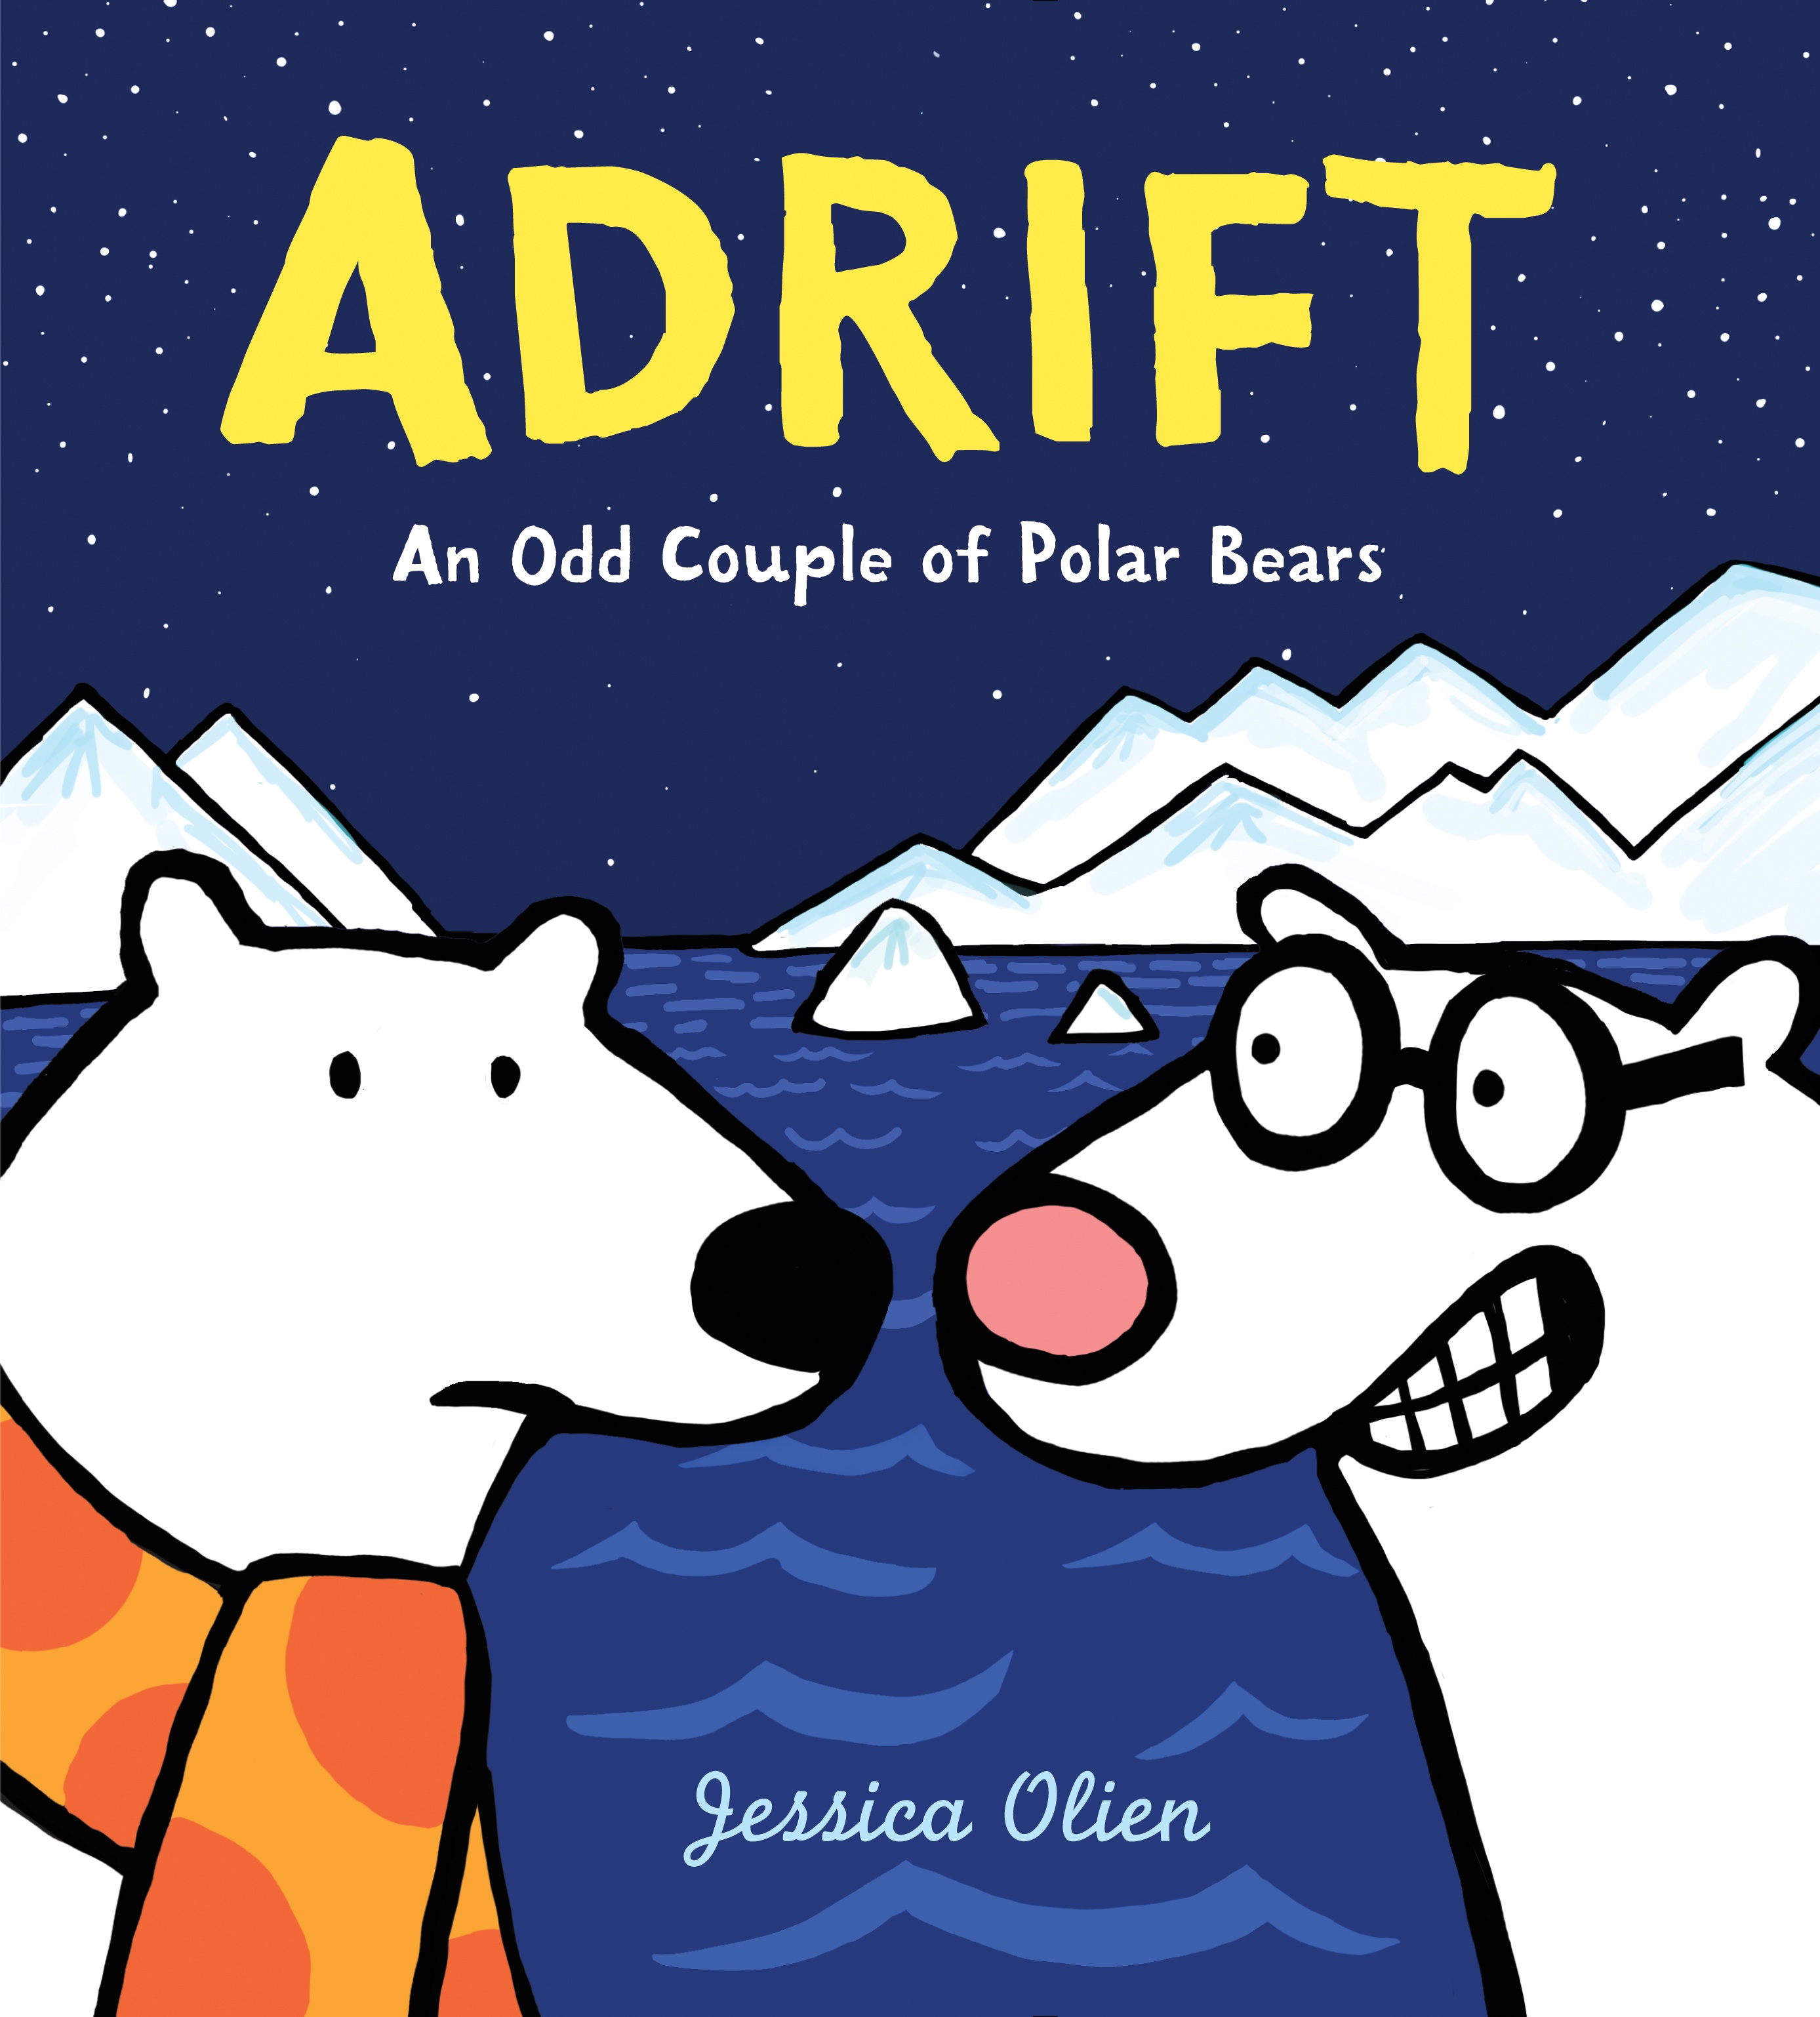 Sunday Story Time with Jessica Olien (author of Adrift)